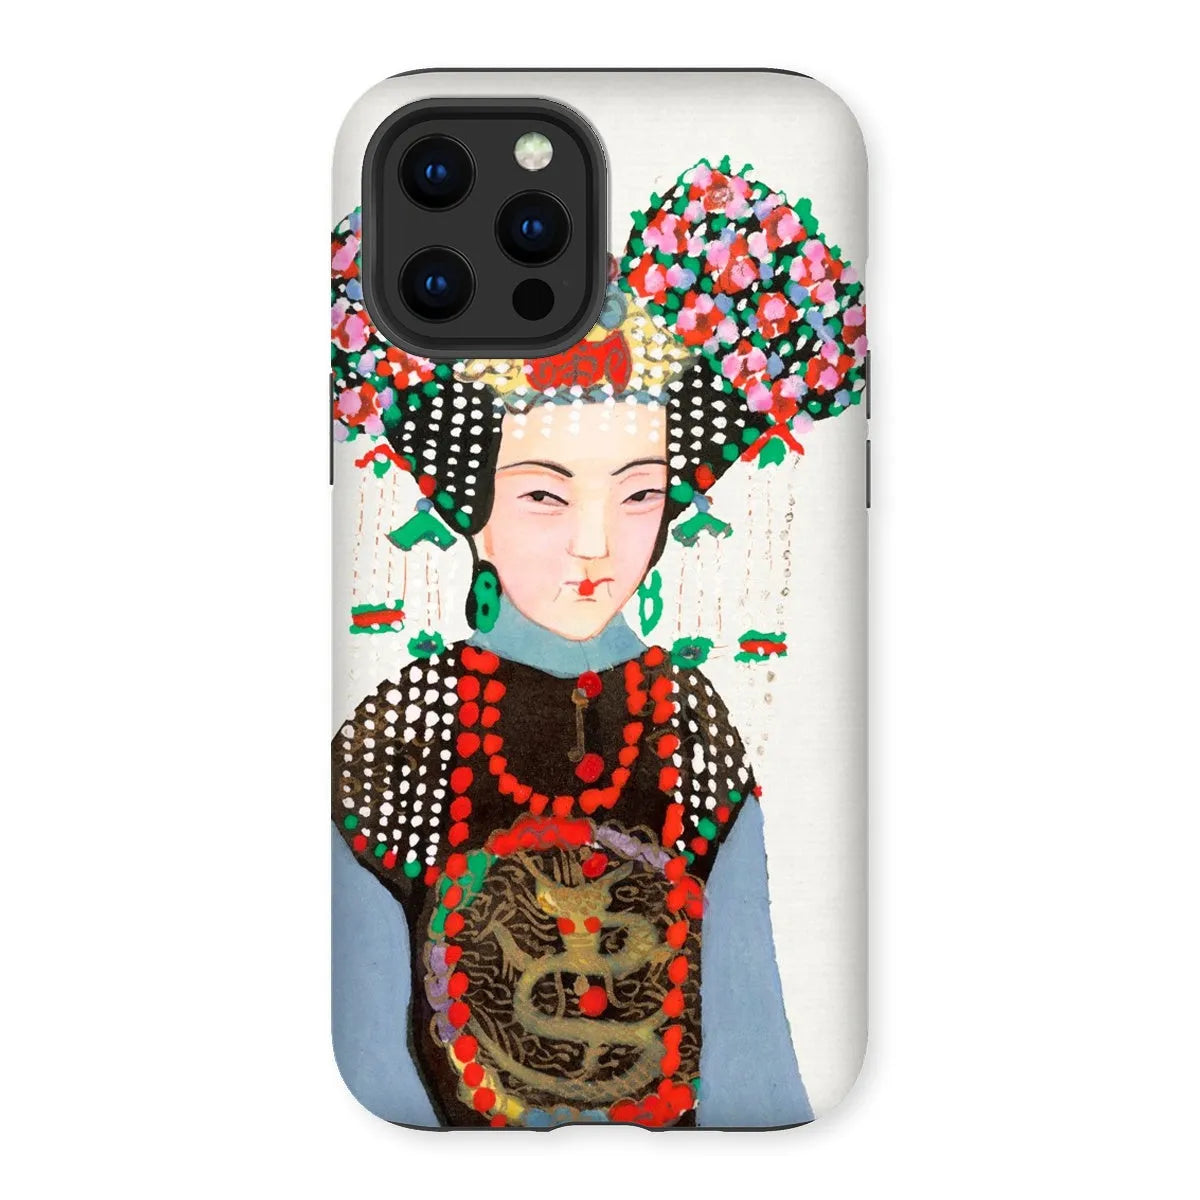 Chinese Empress - Manchu Art Phone Case - Iphone 13 Pro Max / Matte - Mobile Phone Cases - Aesthetic Art